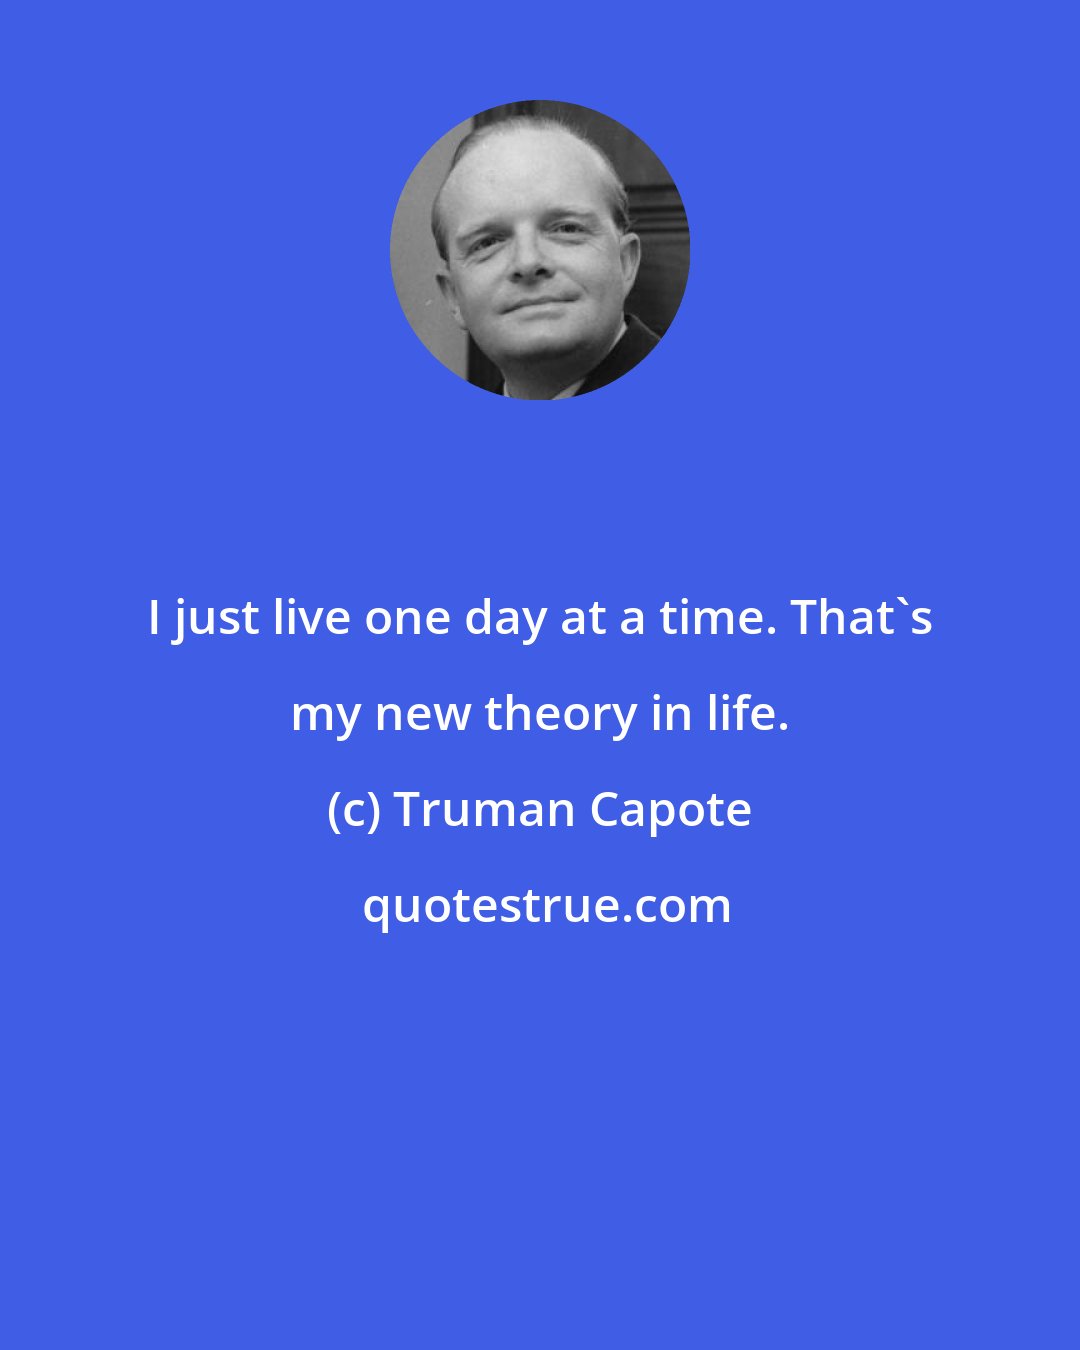 Truman Capote: I just live one day at a time. That's my new theory in life.